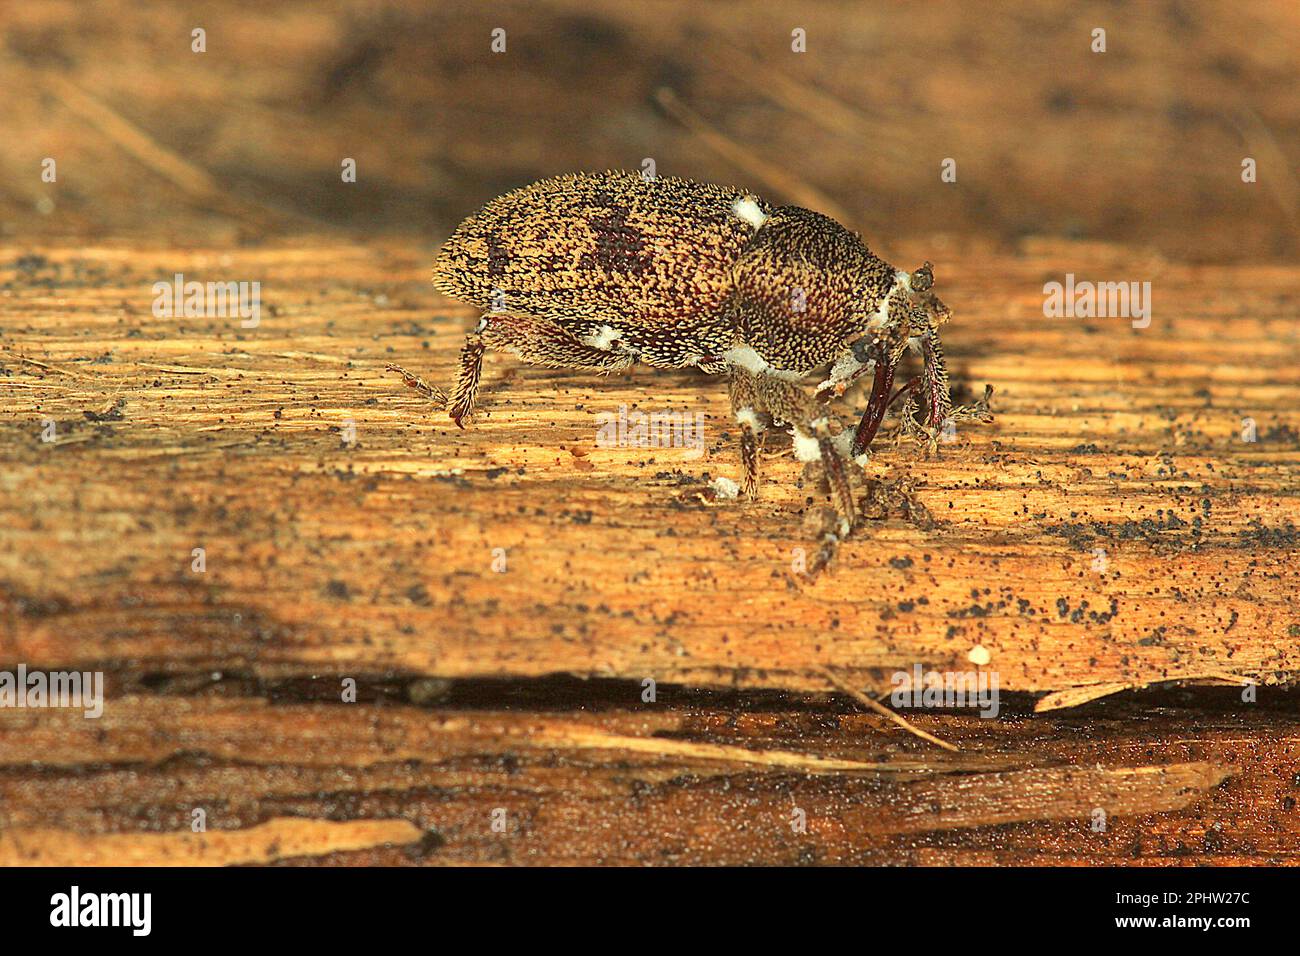 Weevil (Strongylopterus hylobioides) possibly infected with icing sugar fungus Stock Photo